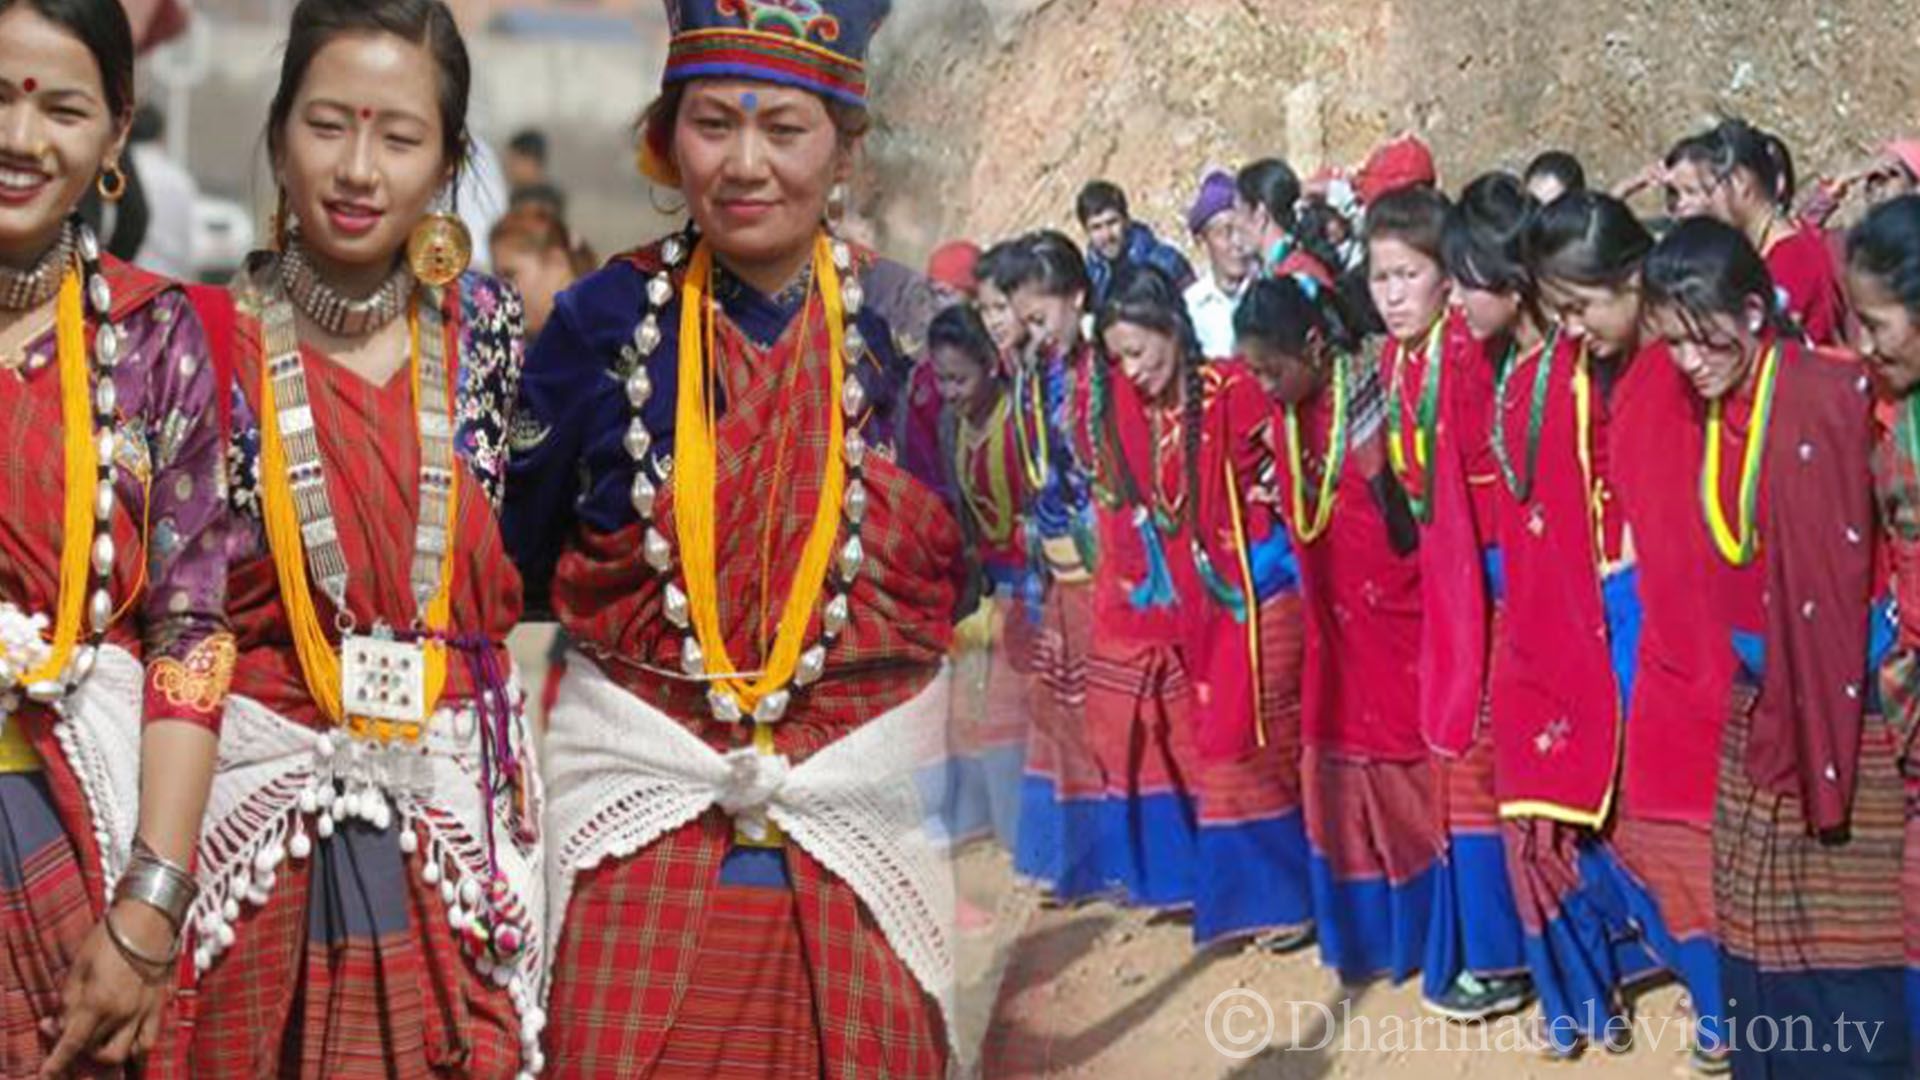 Tamang and Sherpa communities across the country celebrating Lhosar